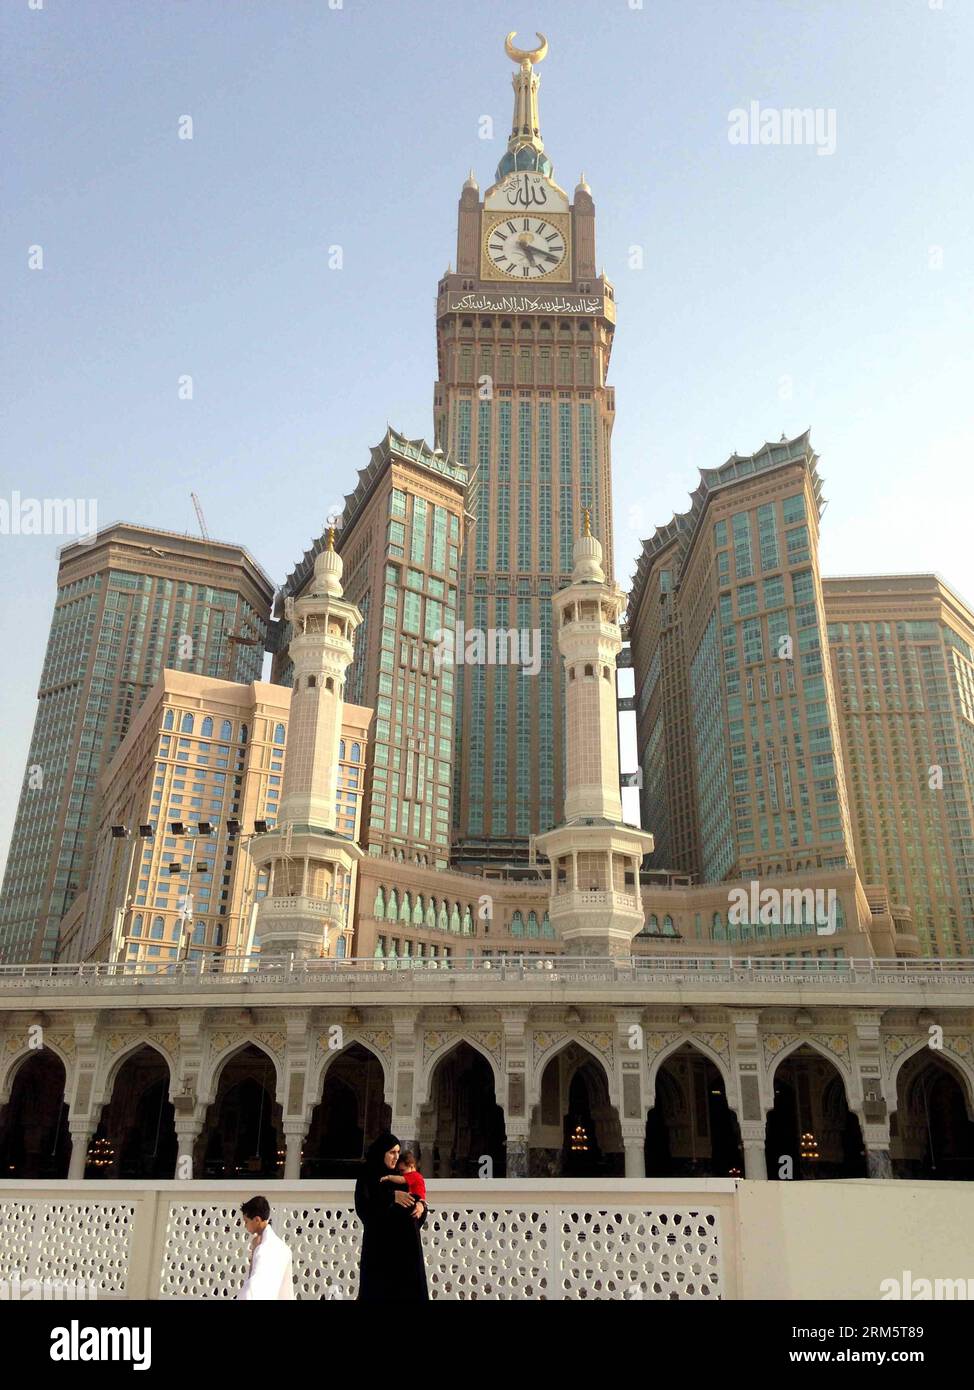 Bildnummer: 60714725  Datum: 14.11.2013  Copyright: imago/Xinhua (131114) -- RIYADH, Nov. 14, 2013 (Xinhua) -- Picture taken on Oct. 10, 2013 shows Makkah Tower in Makkah, Saudi Arabia. Makkah Tower retains its place as the 2nd tallest building in the world. Standing at the height of 1,972 feet (601.07 m), the Abraj Al-Bait Tower, also known as Makkah Royal Clock Tower, has been declared the second tallest building in the world by the United States Council on Tall Buildings and Urban Habitat that is recognized as a world authority on supersized skyscrapers. Only Burj Khalifa in Dubai, which is Stock Photo